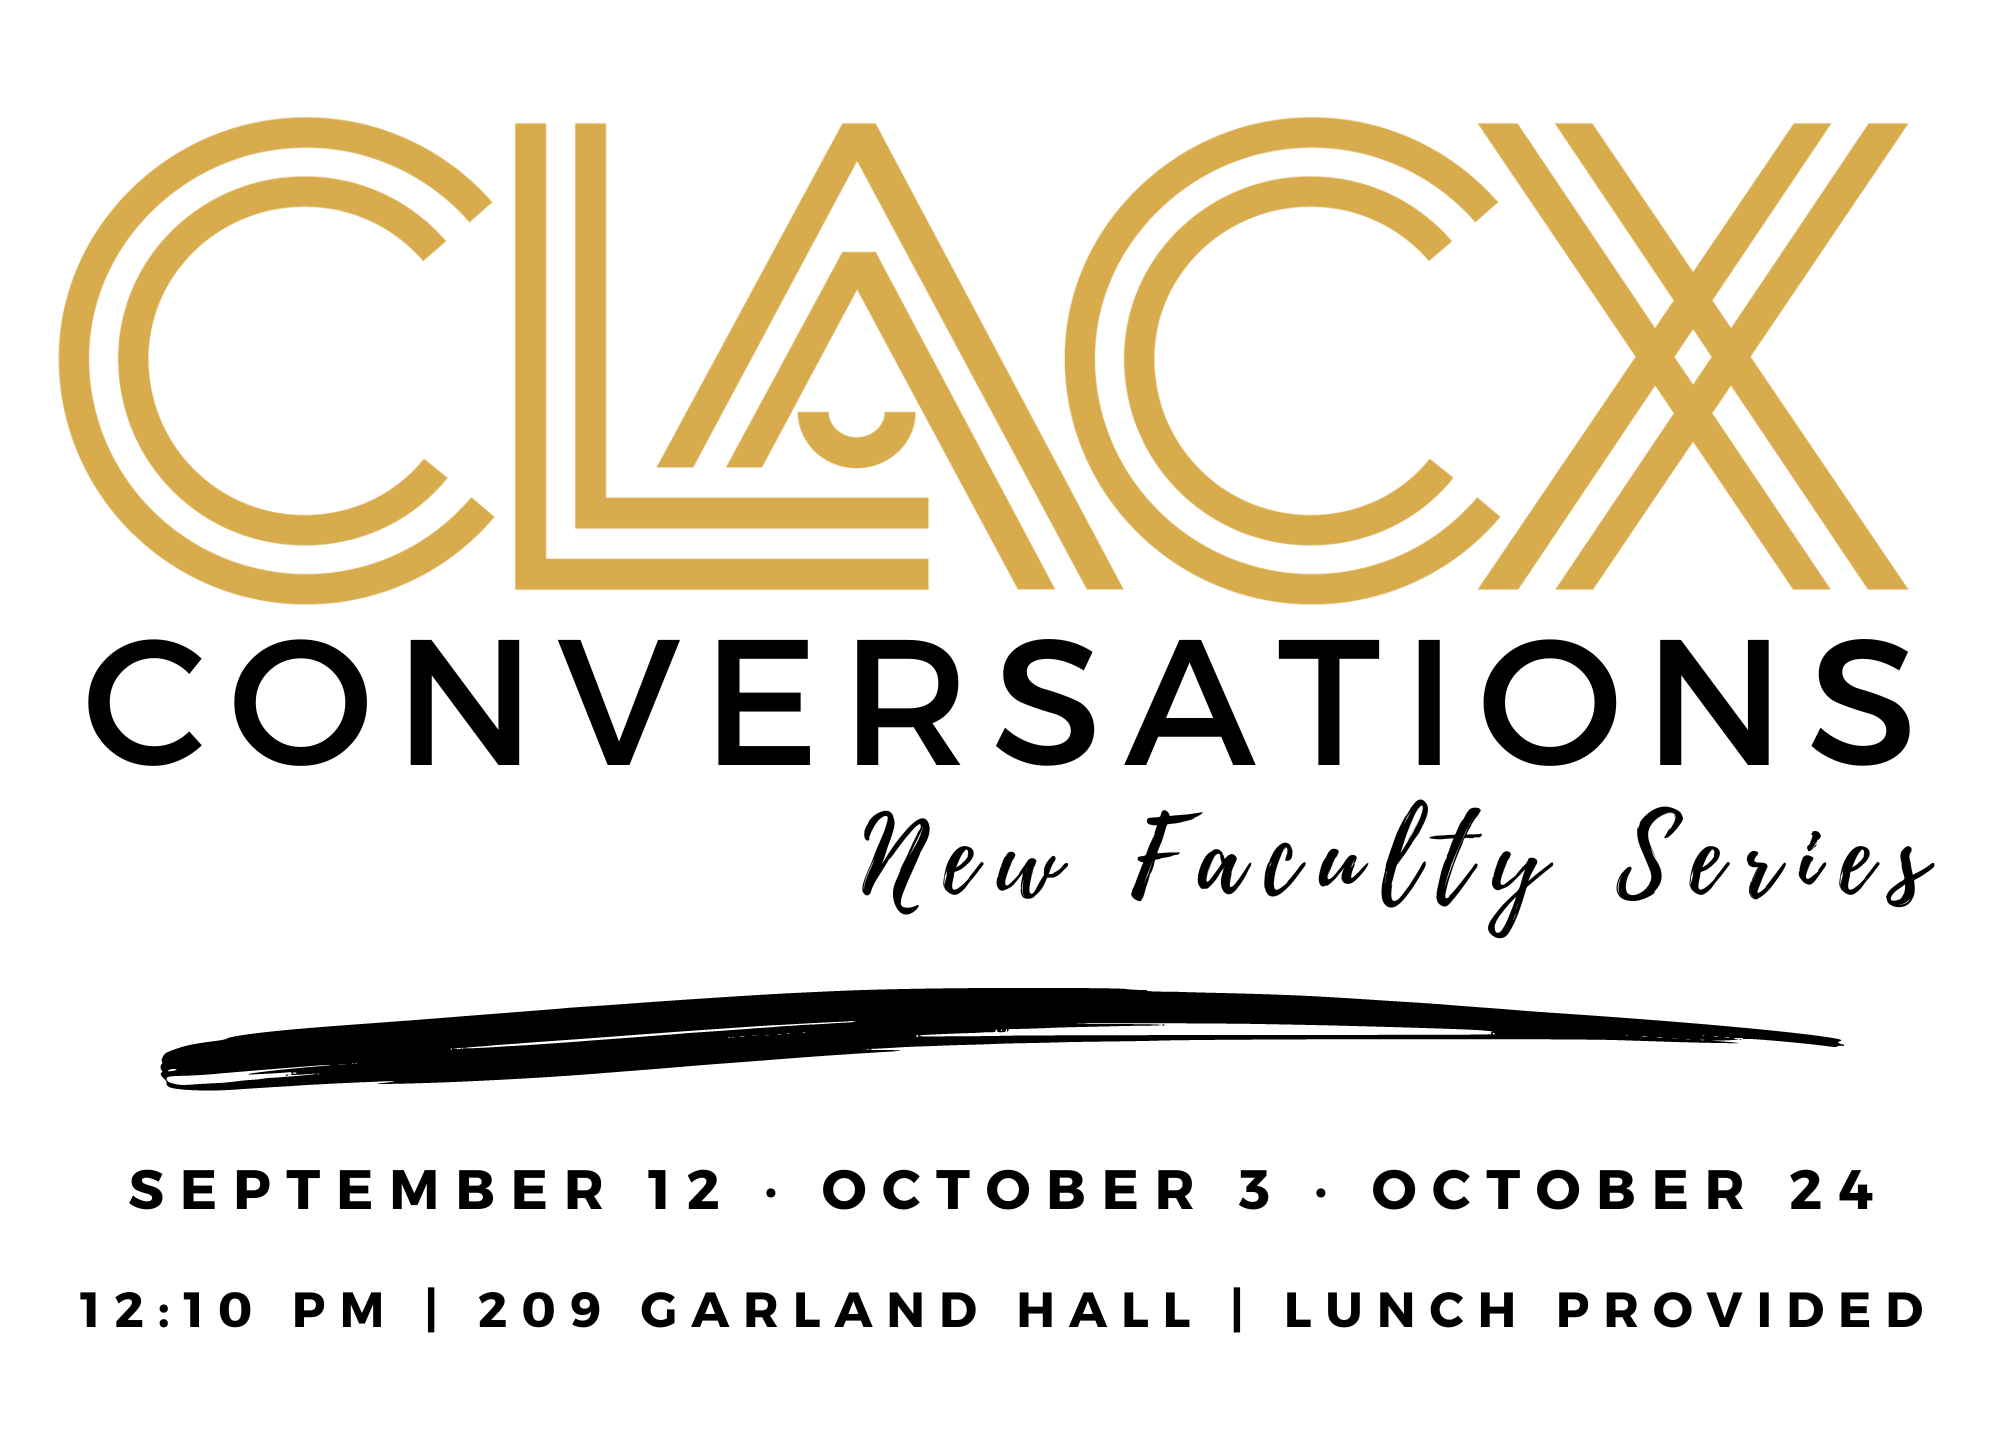 CLACX hosts final program of “New Faculty Series” Oct. 24